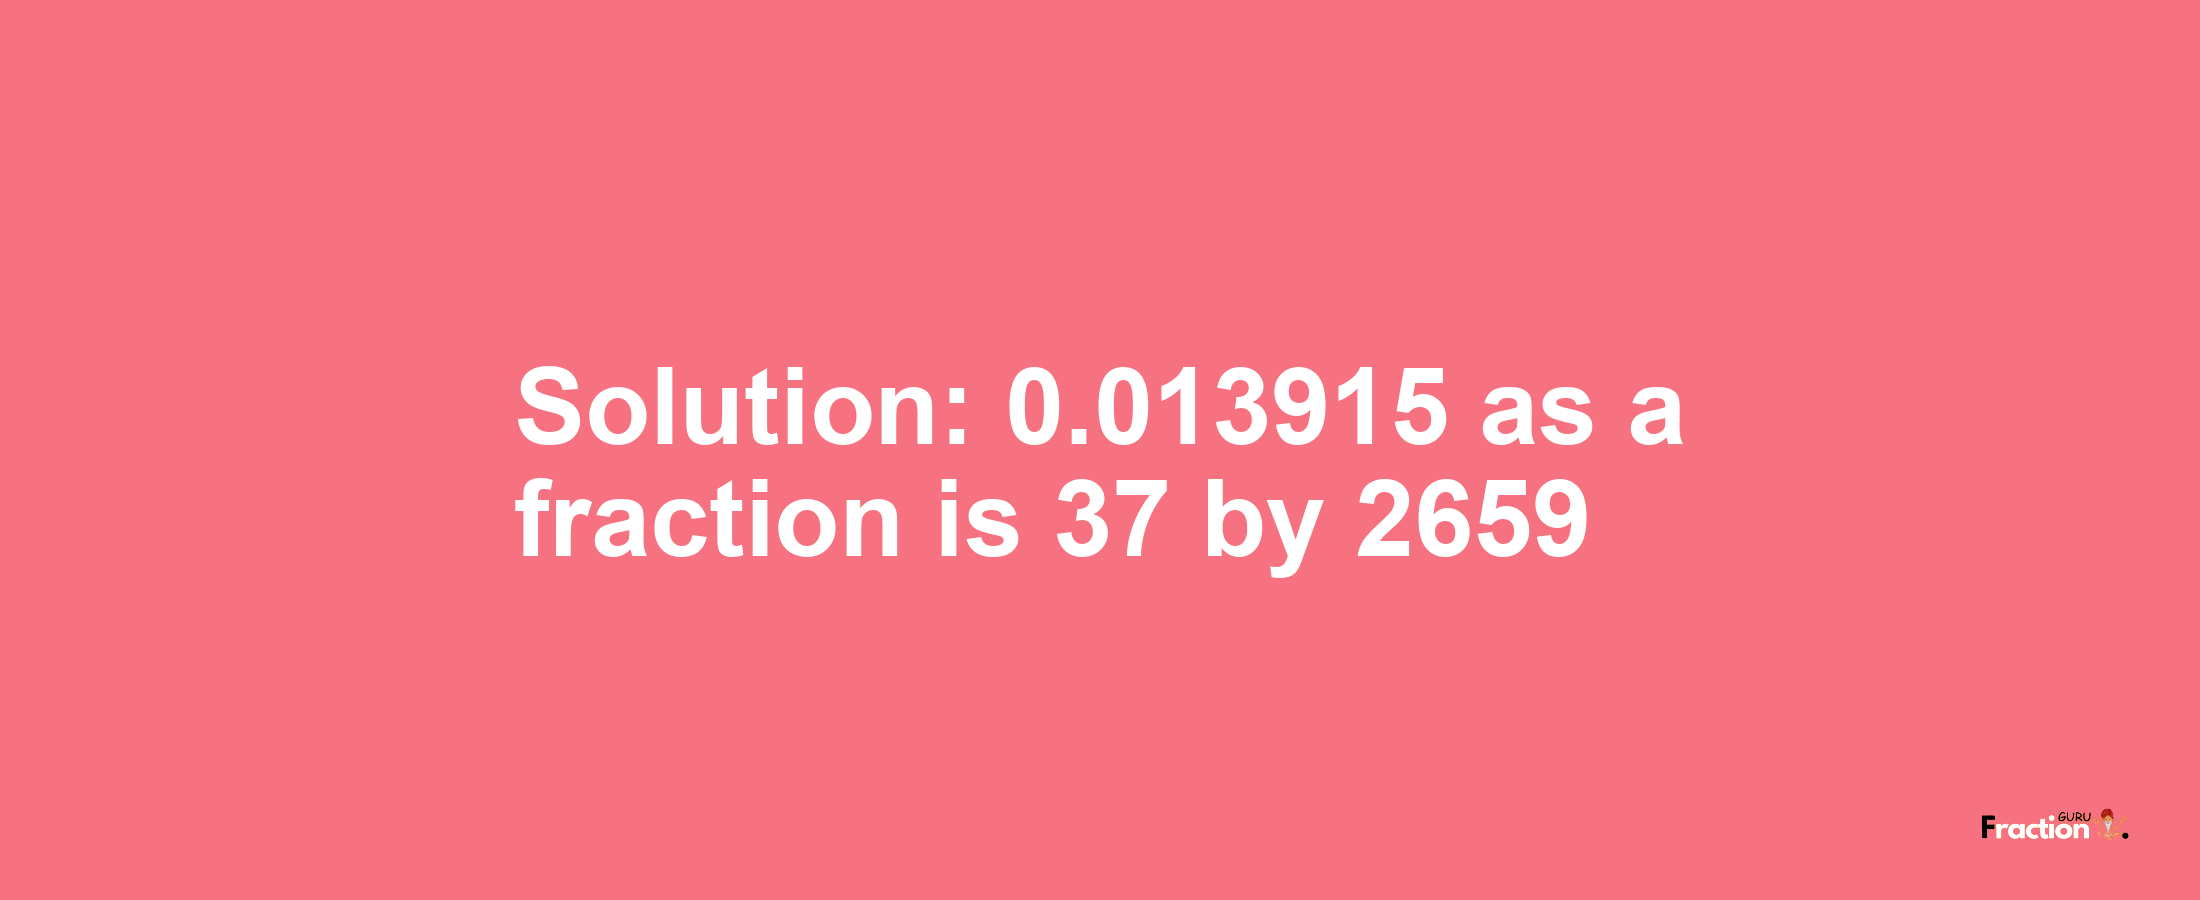 Solution:0.013915 as a fraction is 37/2659